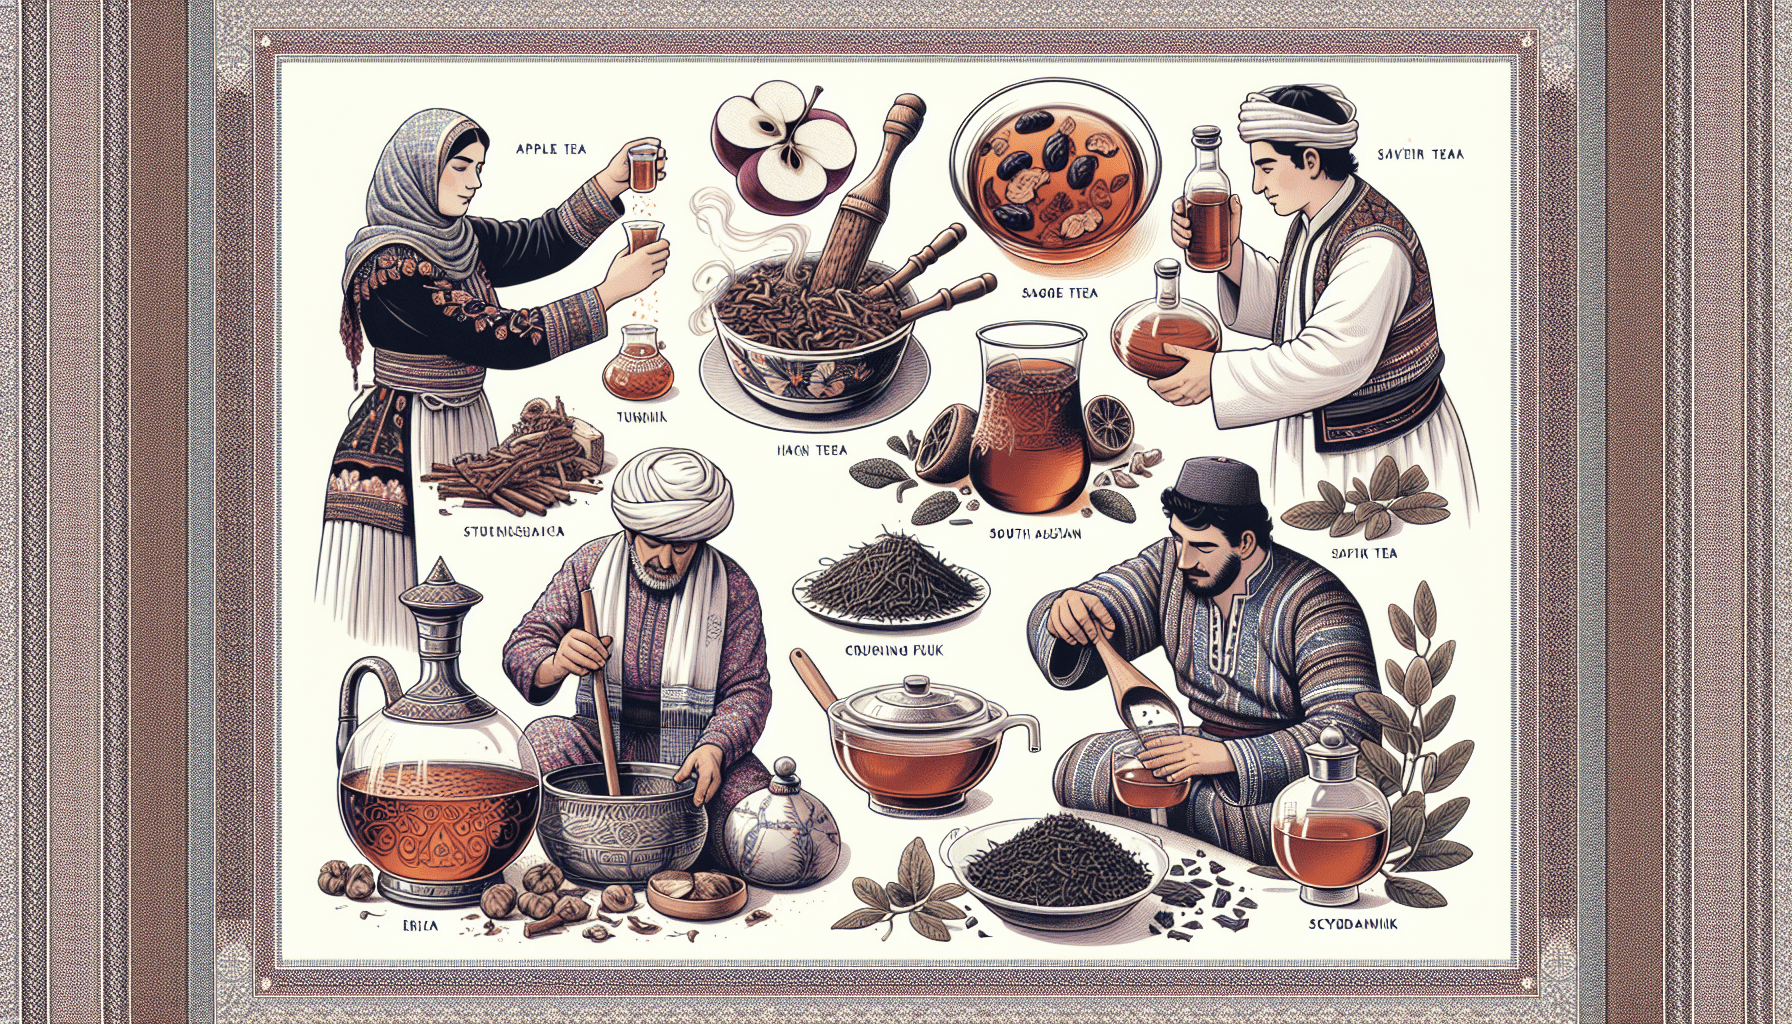 Illustration of middle eastern tea culture with nine people engaged in traditional tea preparation and serving activities, surrounded by labels and ornate borders.